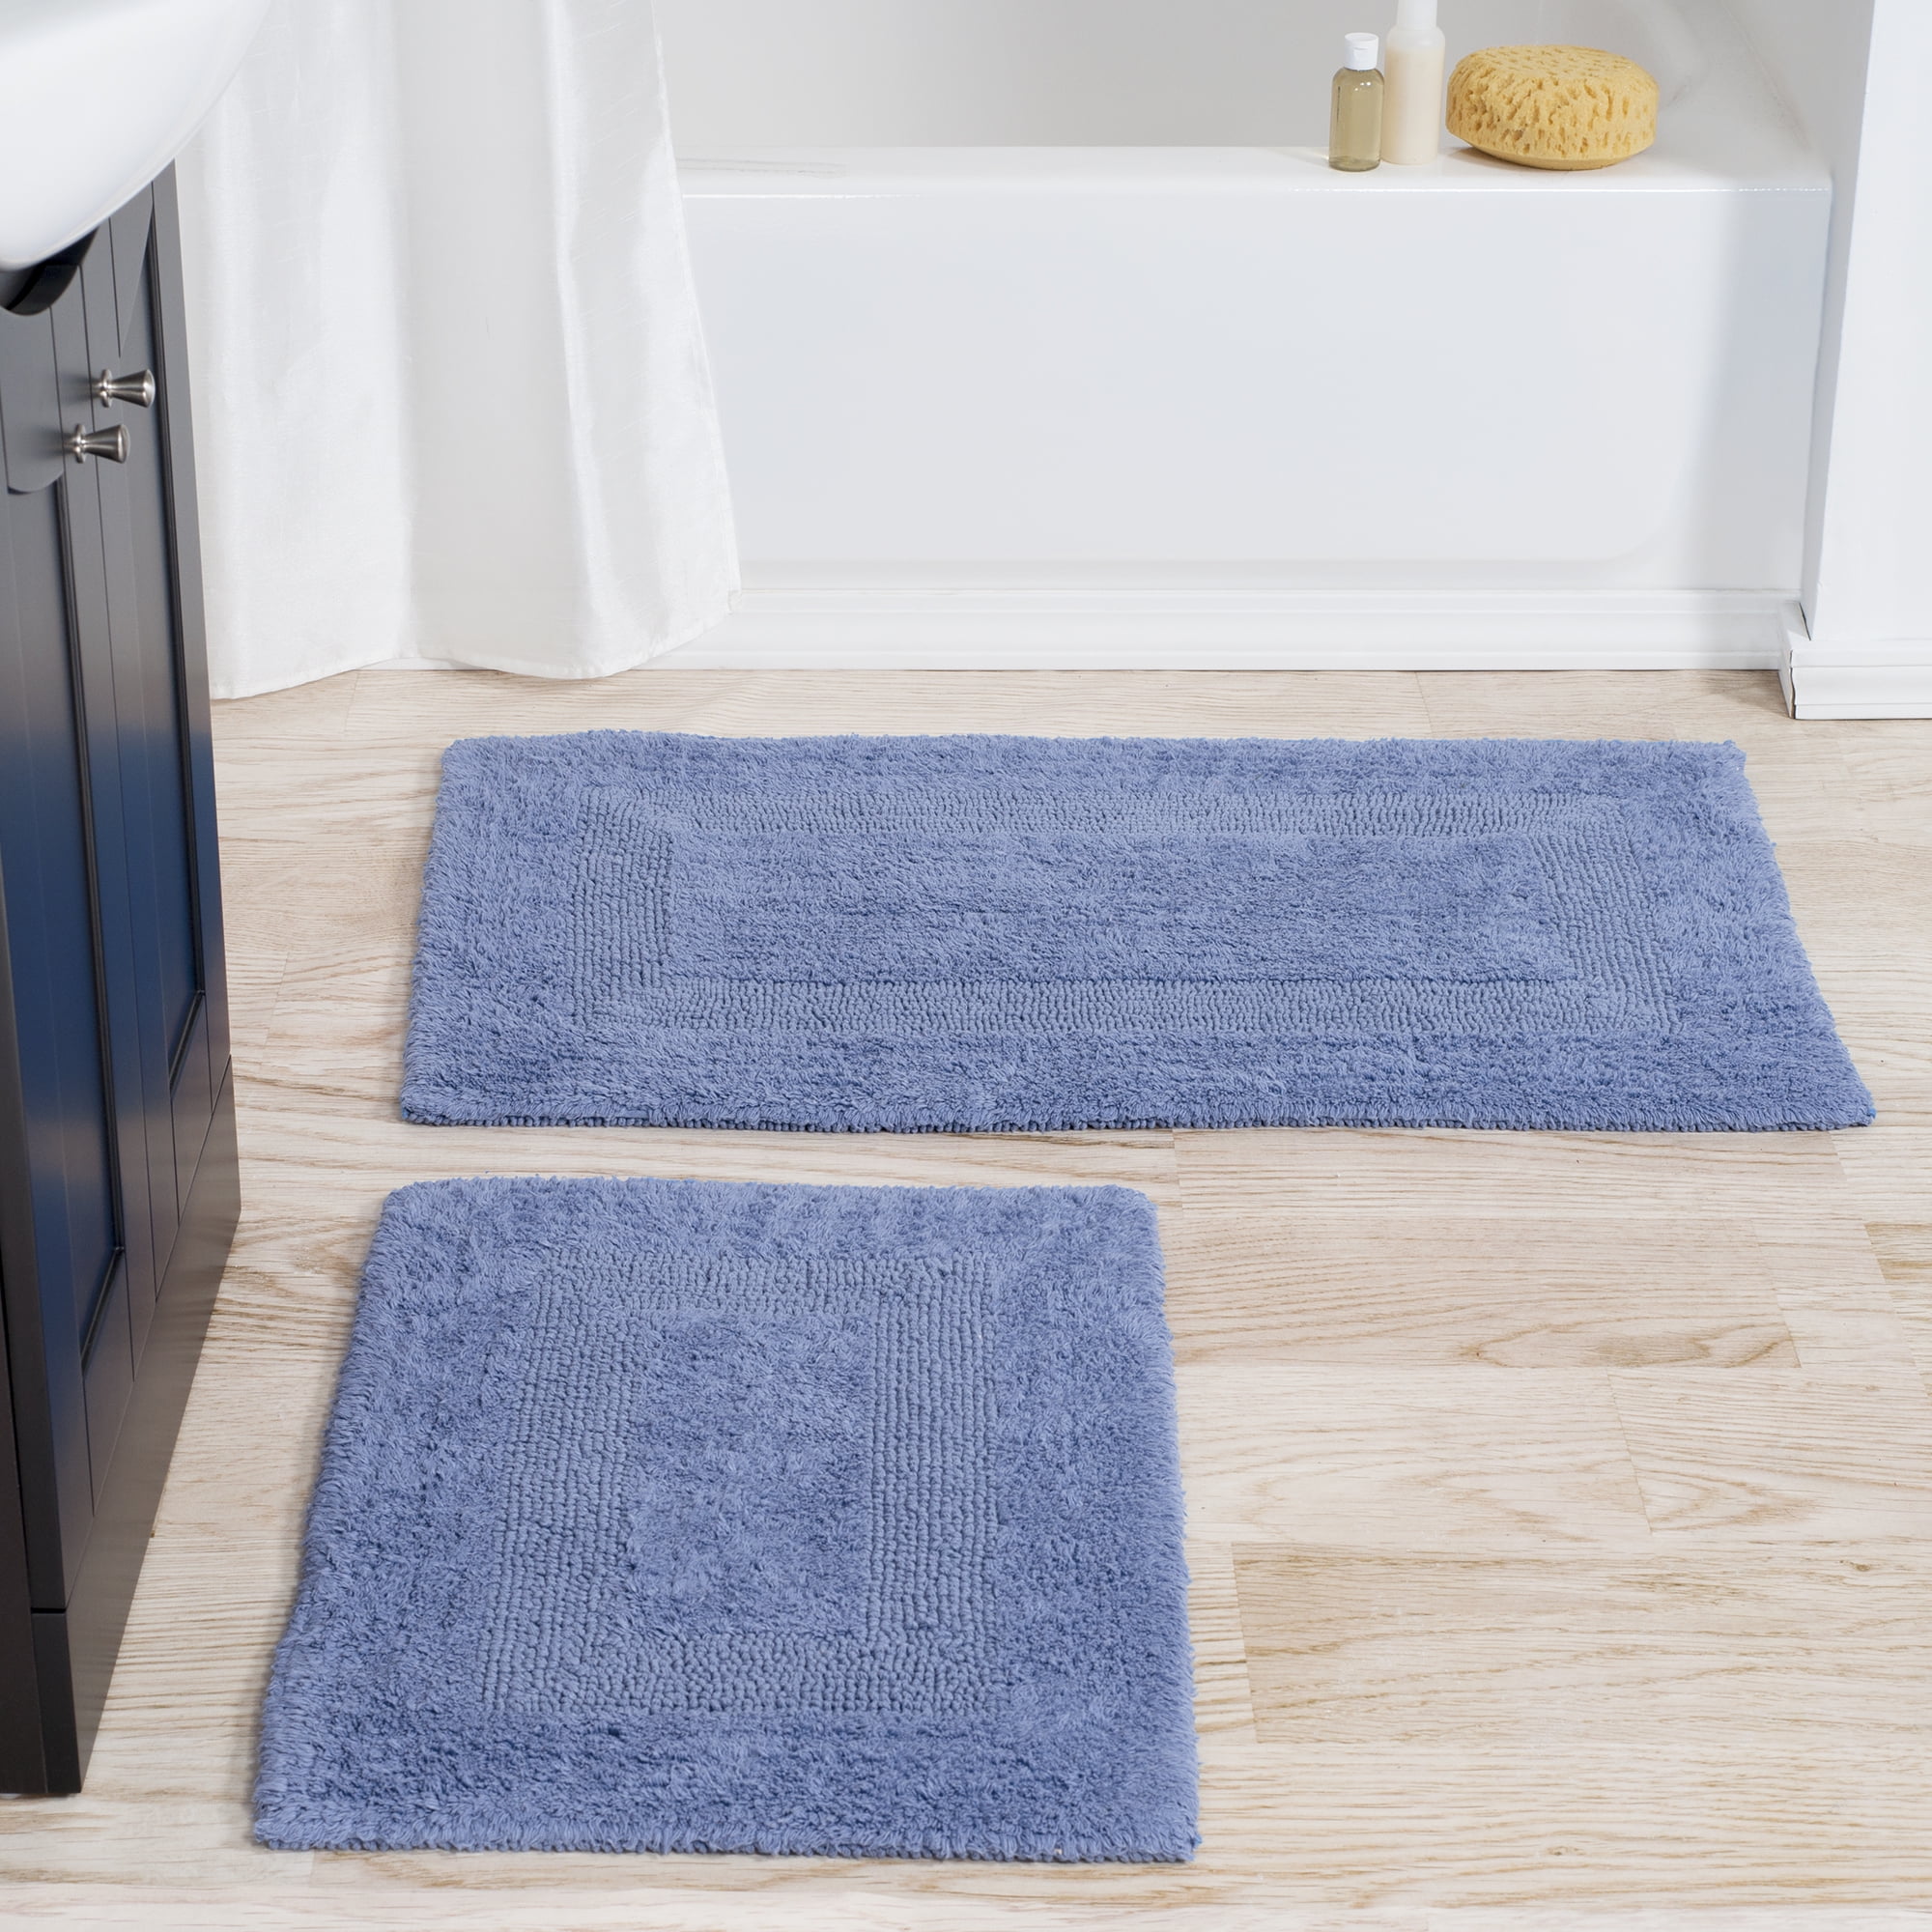 Reversible Bath and Hand Towels – Coming Soon